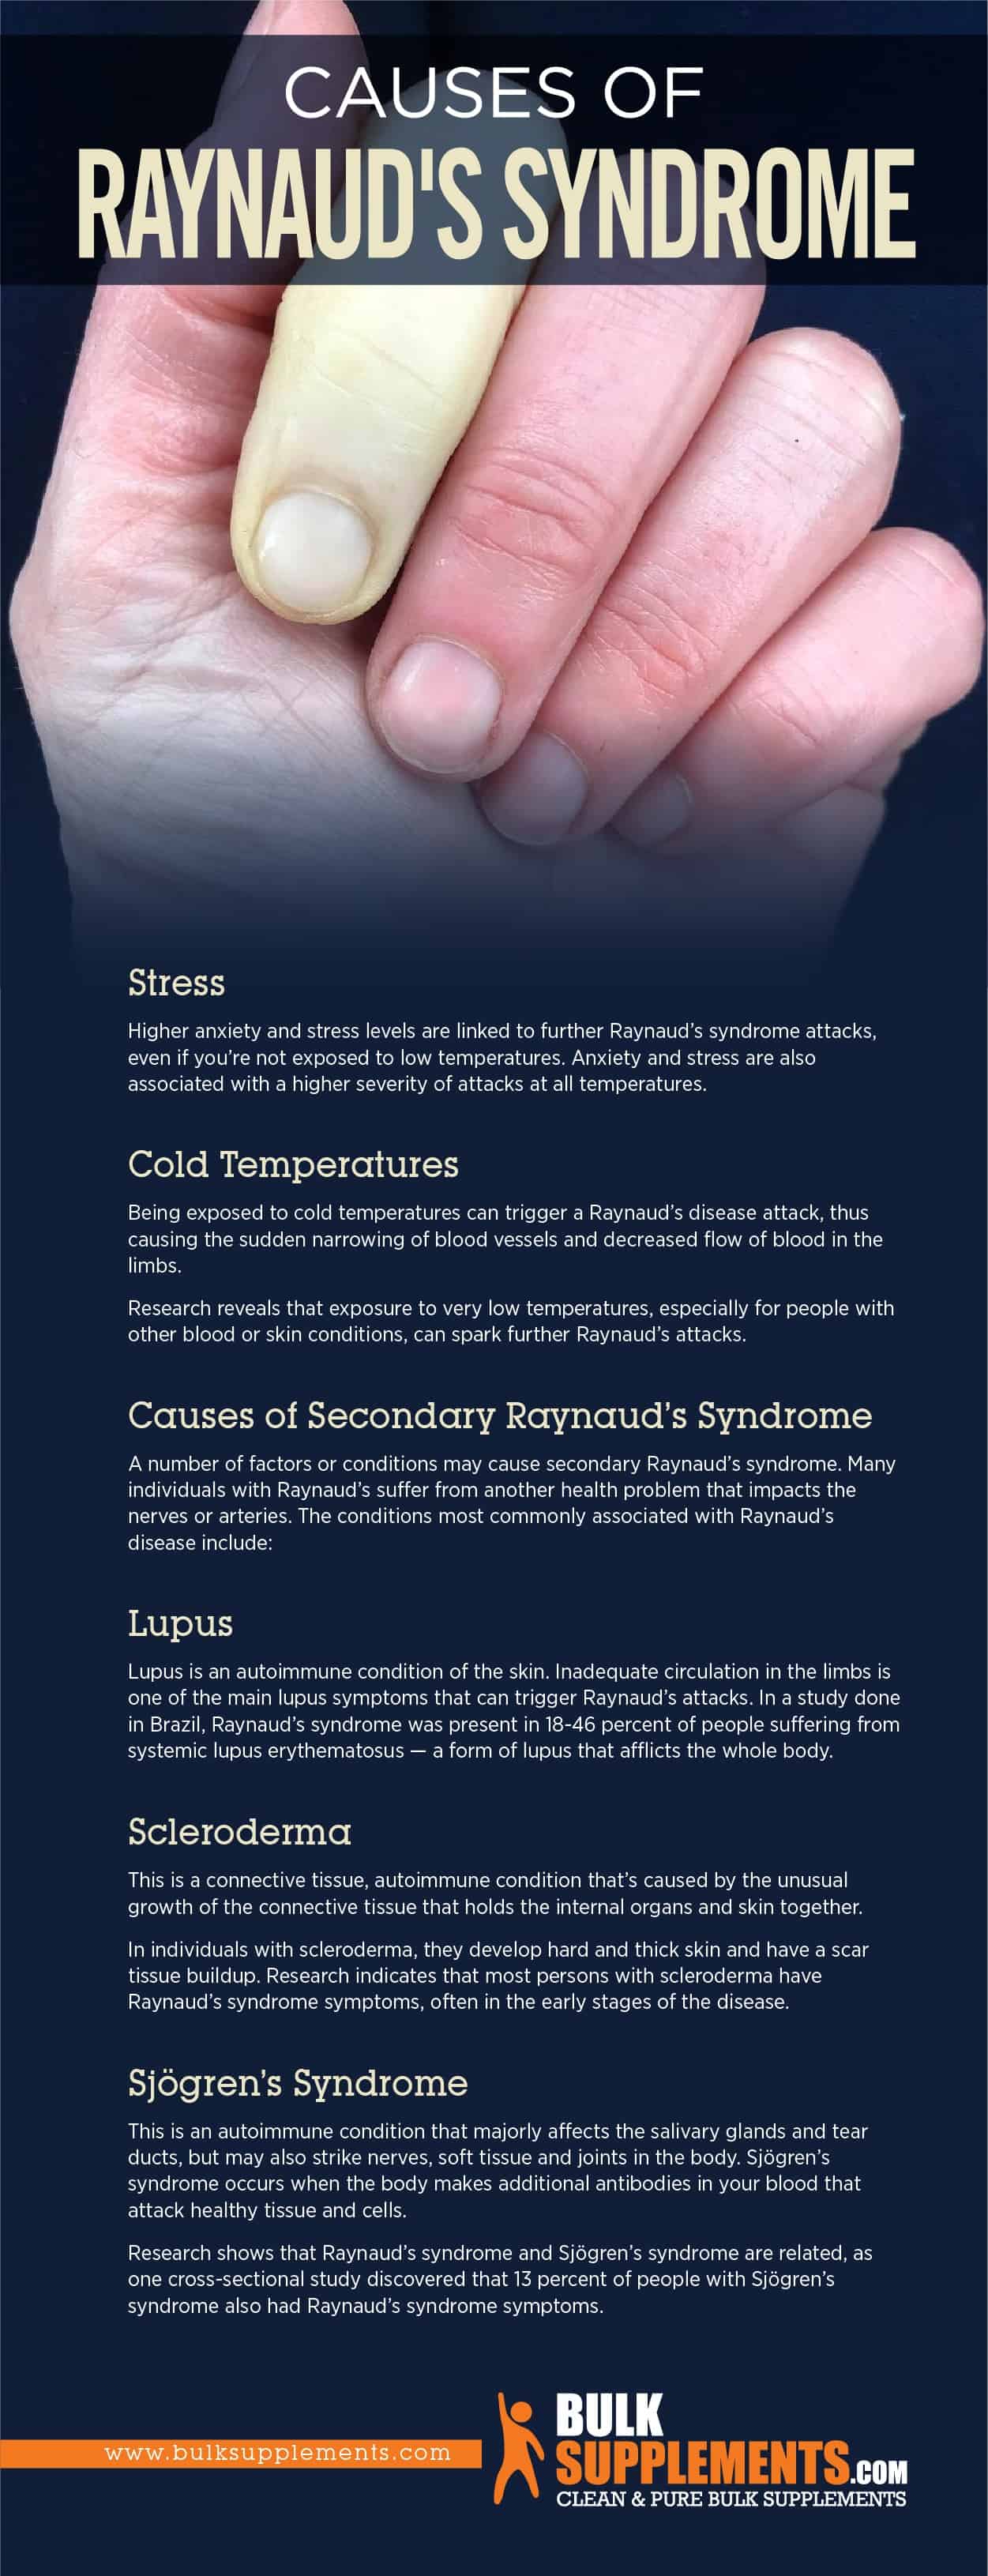 Causes of Raynaud's Syndrome